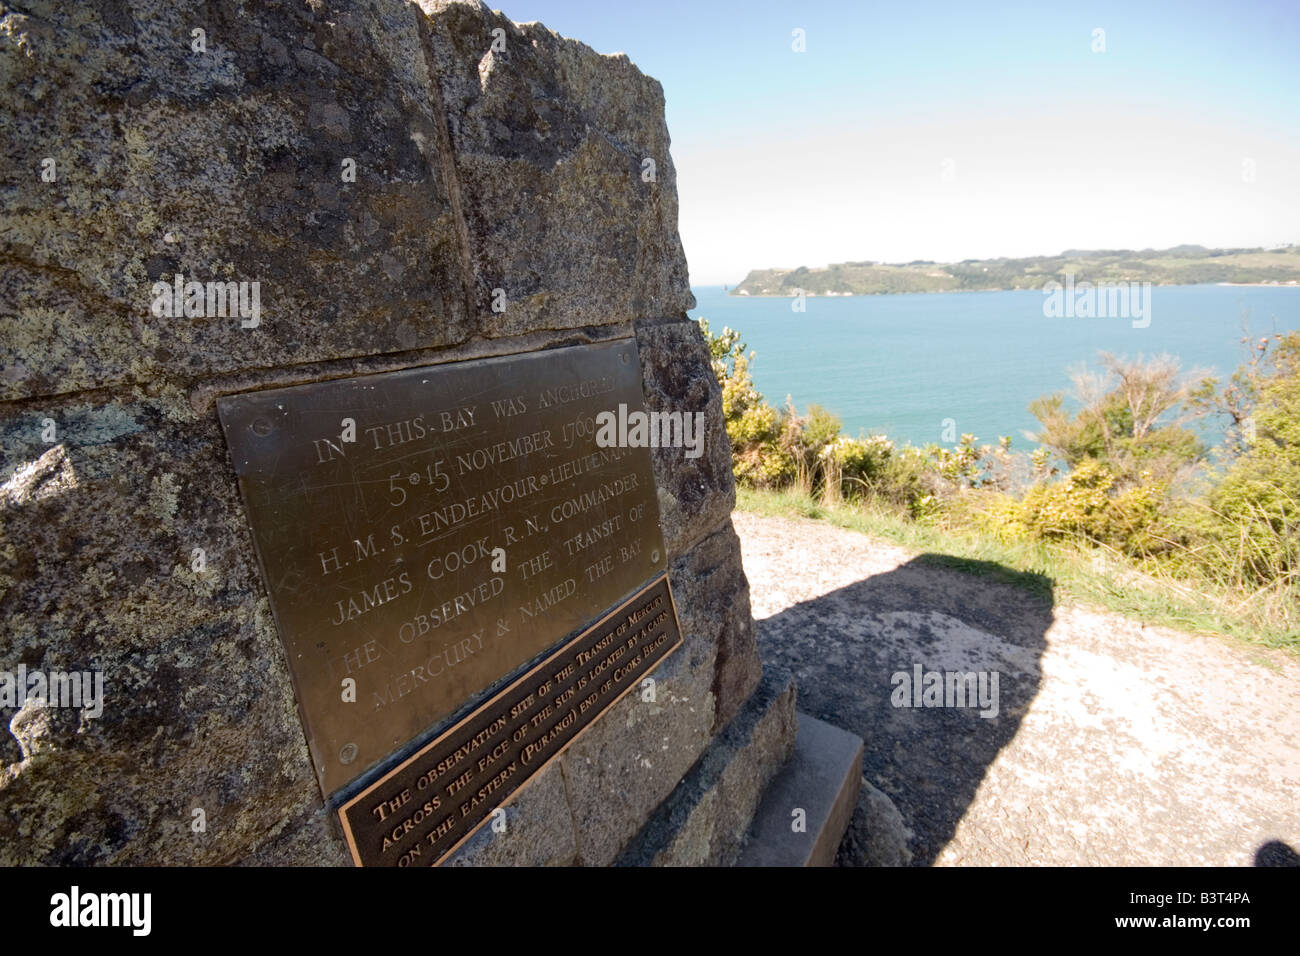 Mercury Bay and plaque commemorating Captain Cook's visit. Stock Photo